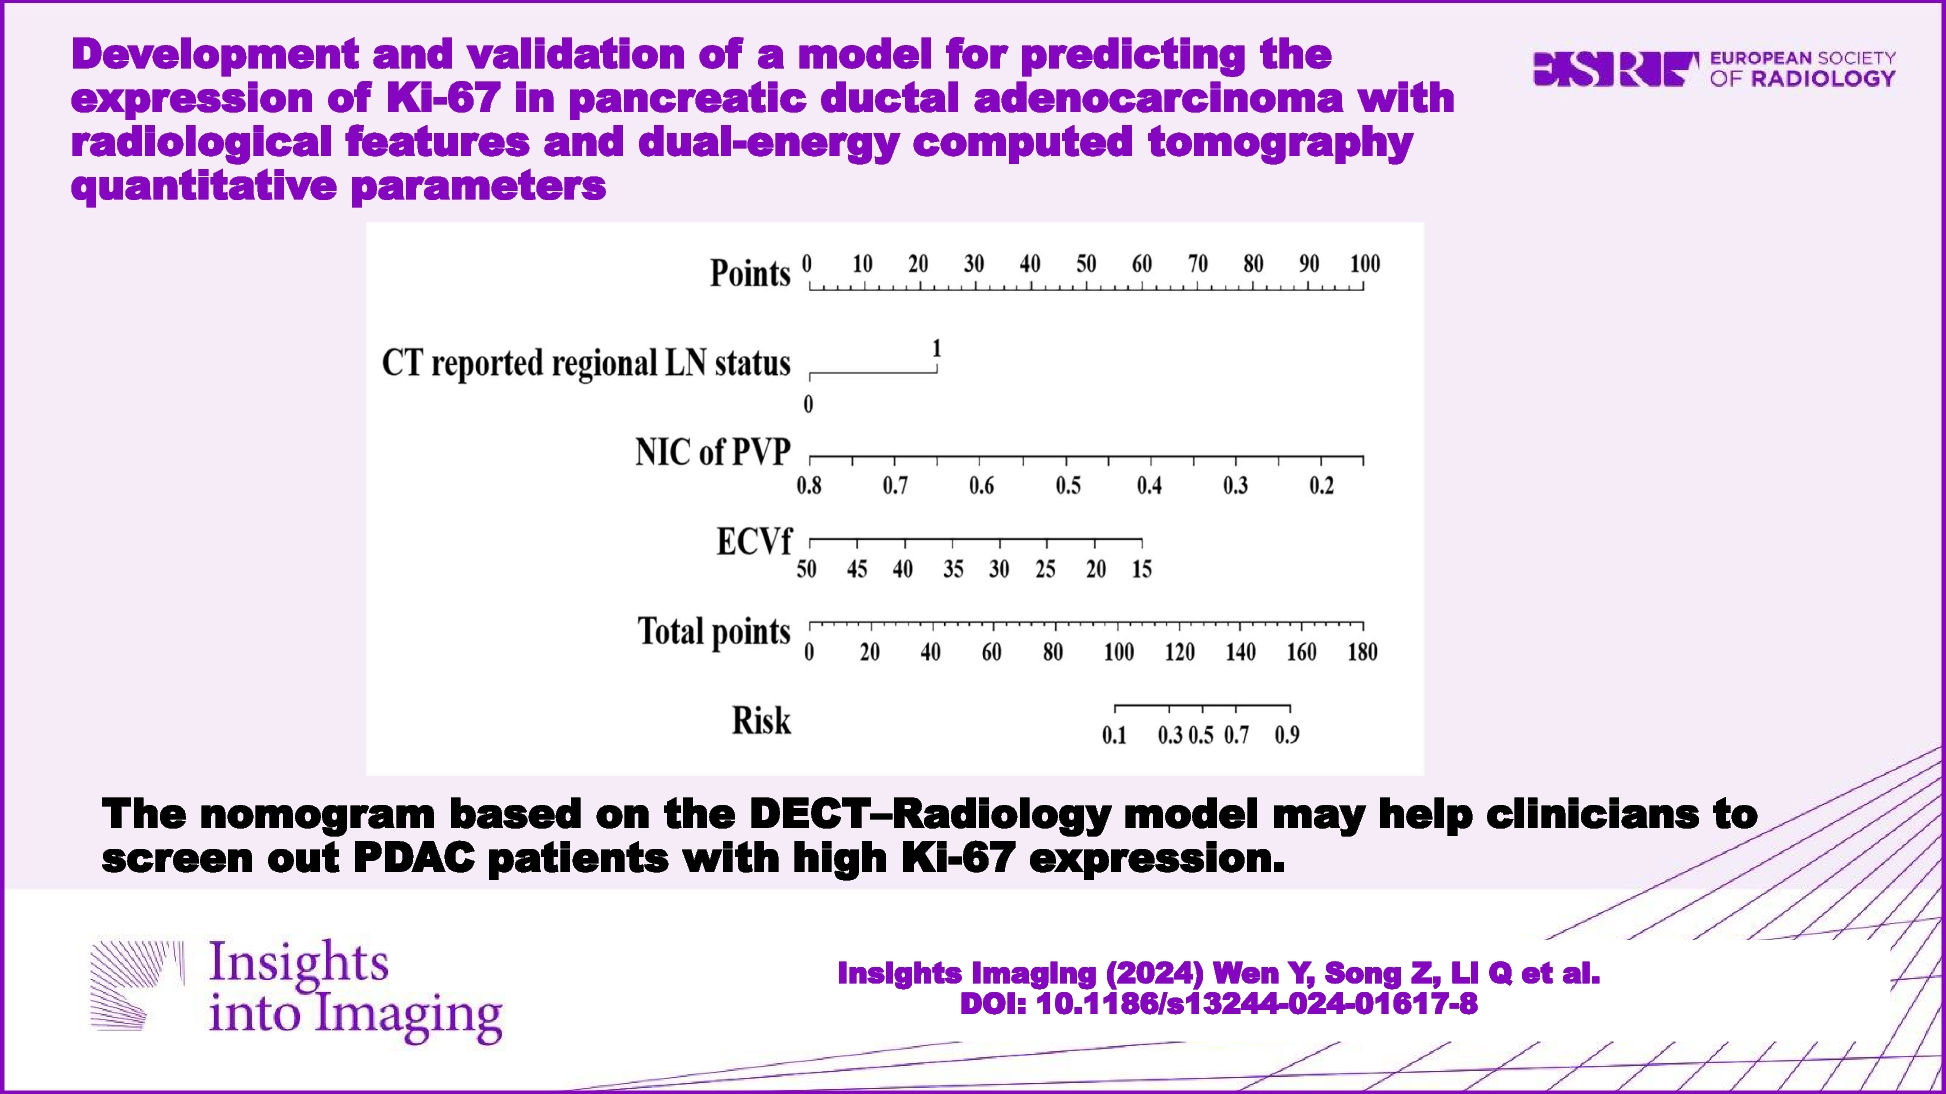 Development and validation of a model for predicting the expression of Ki-67 in pancreatic ductal adenocarcinoma with radiological features and dual-energy computed tomography quantitative parameters